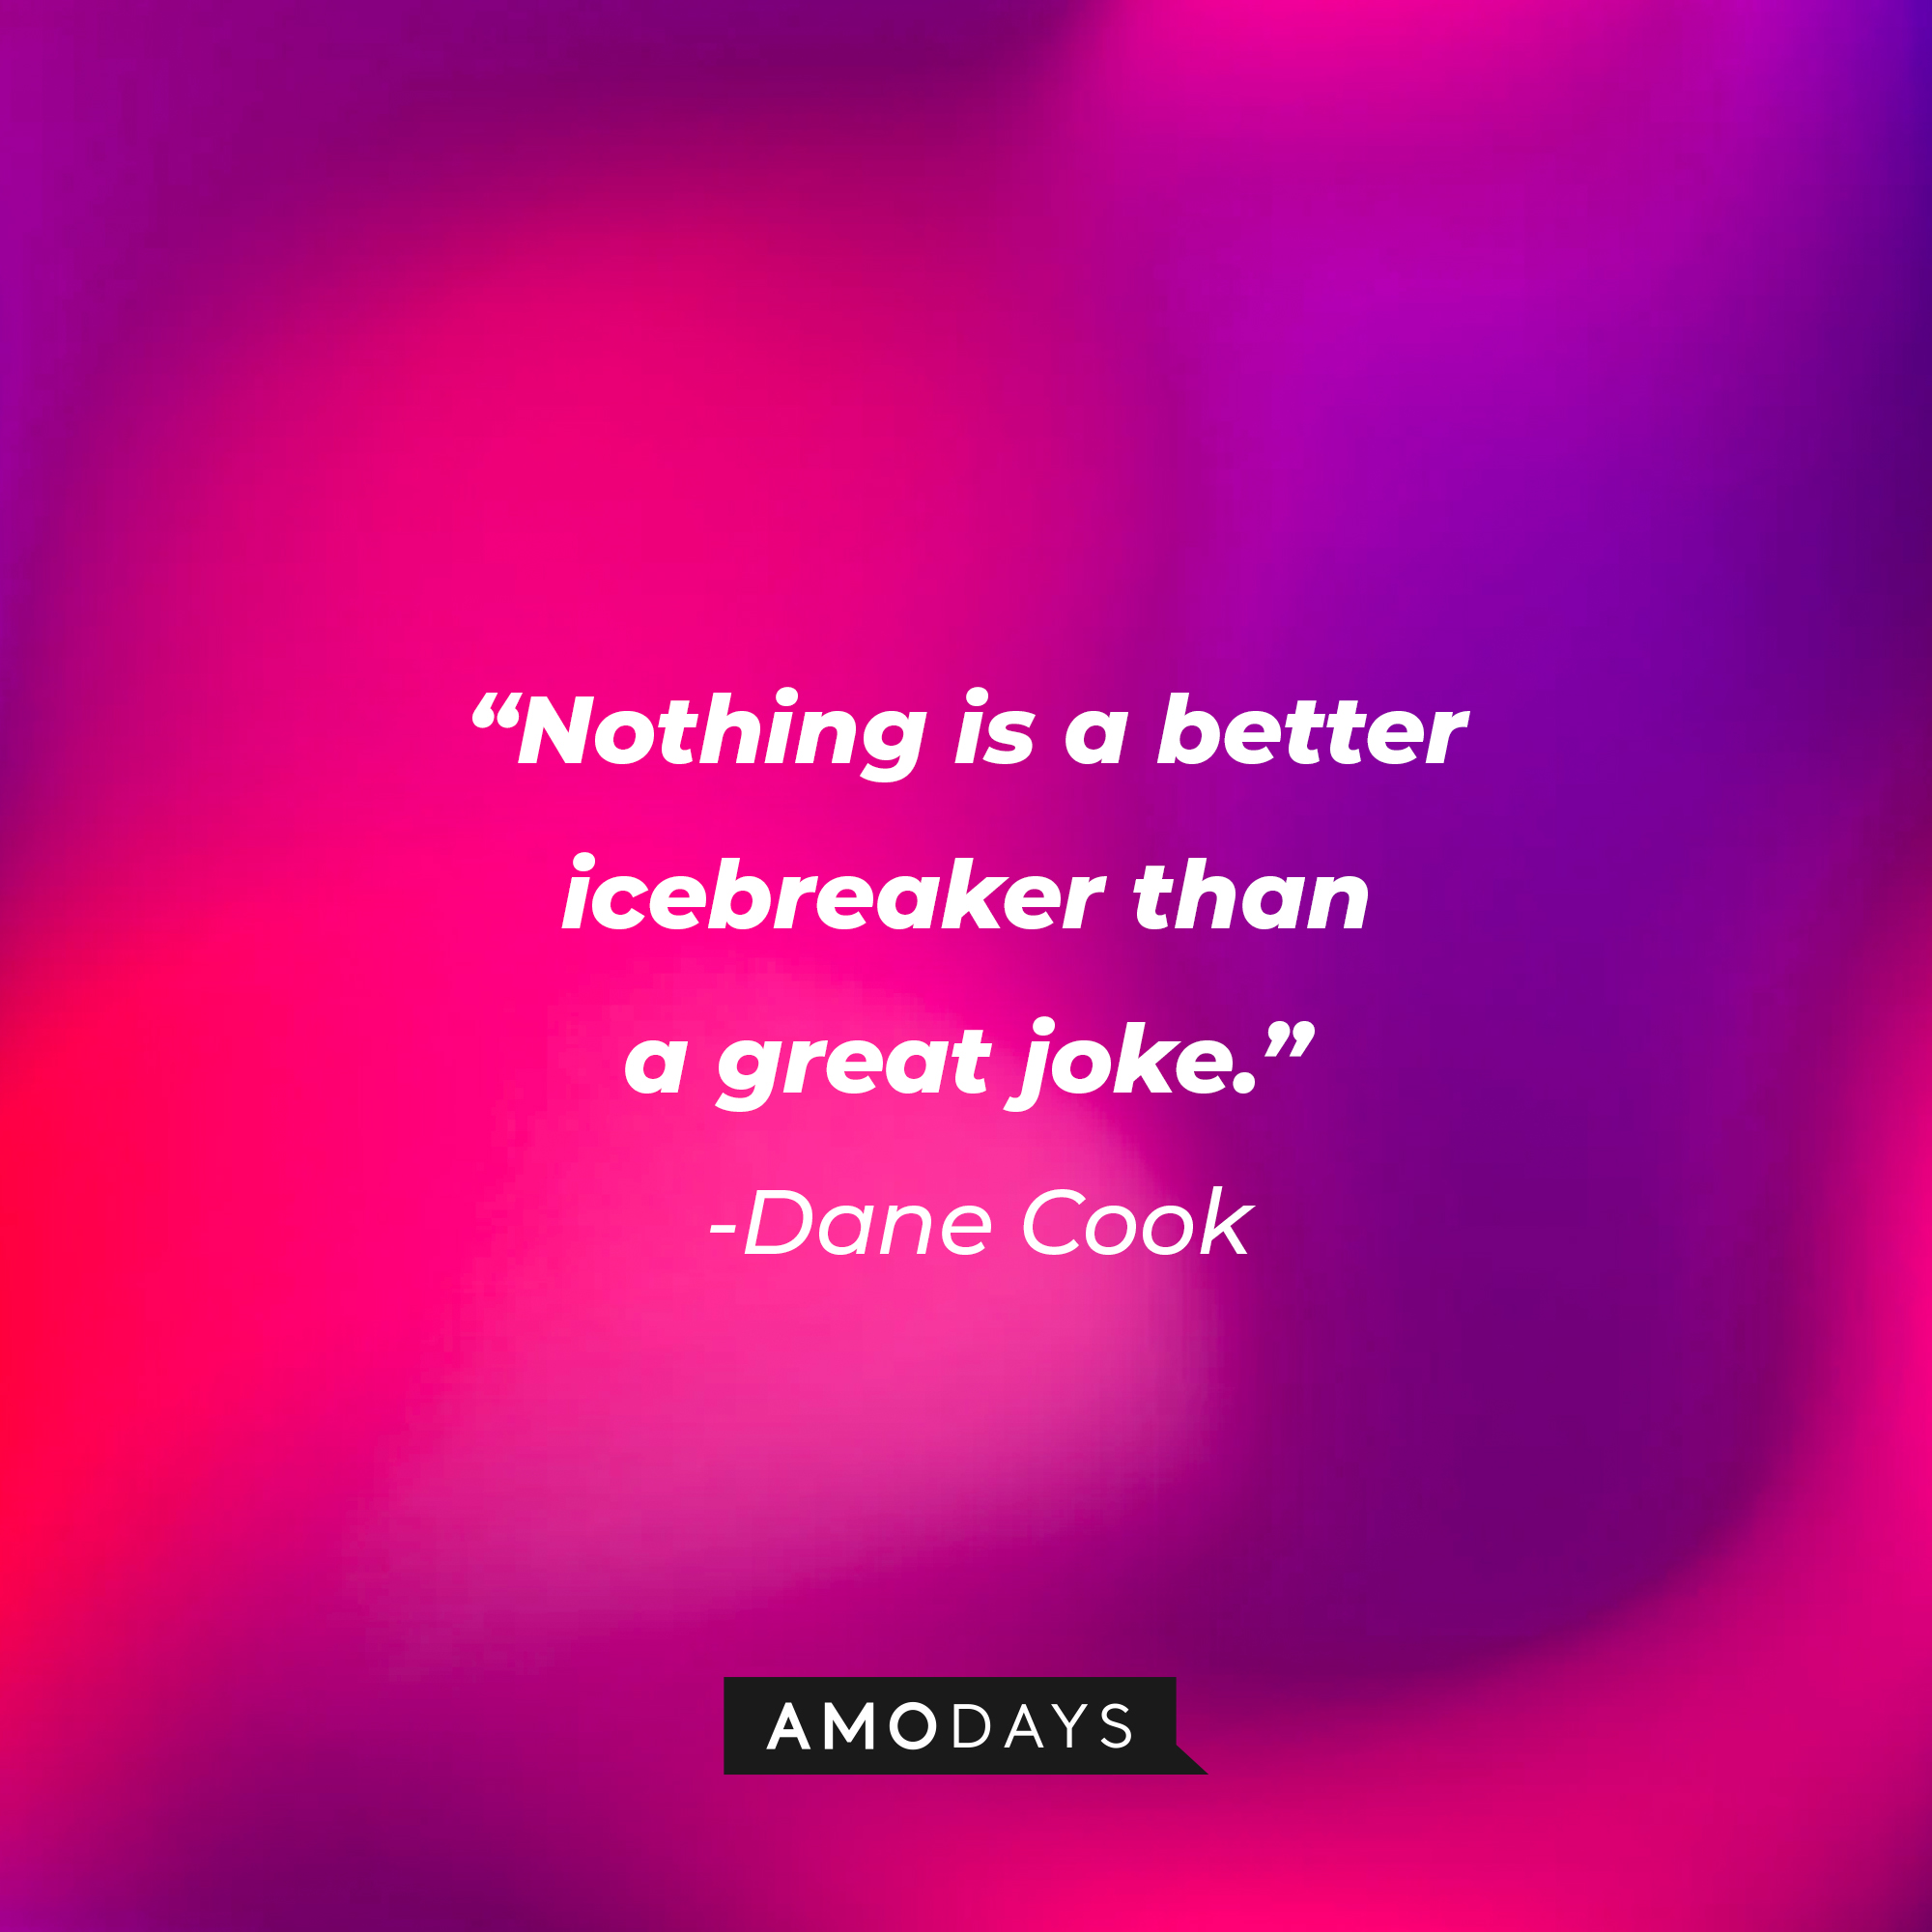 Dane Cook's quote: "Nothing is a better icebreaker than a great joke.” | Source: Amodays